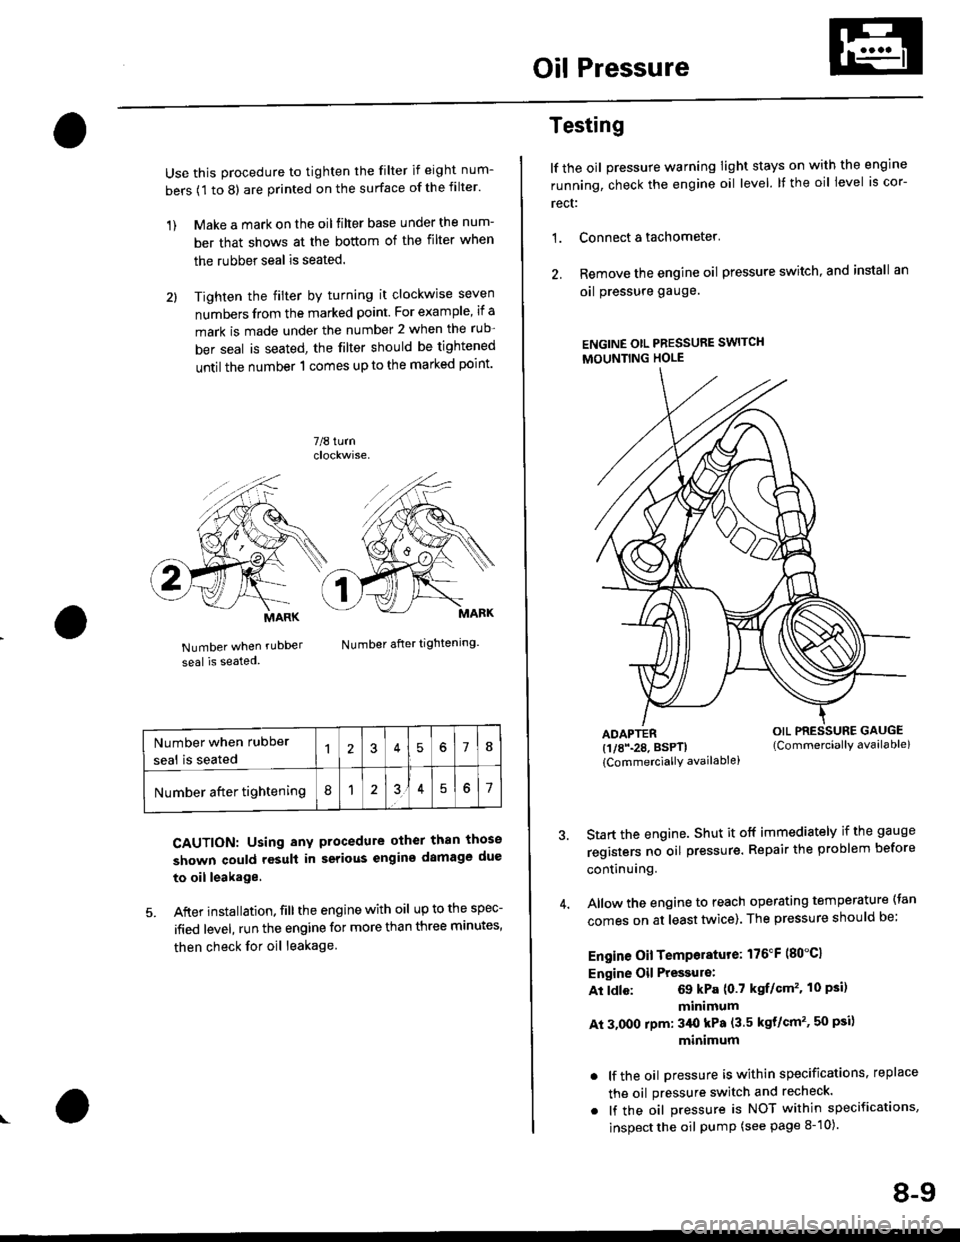 HONDA CIVIC 1996 6.G Workshop Manual Oil Pressure
Use this procedure to tighten the filter if eight num-
bers (1 to 8) are printed on the surface of the filter.
1) Make a mark on the oil filter base under the num-
ber that shows at the b